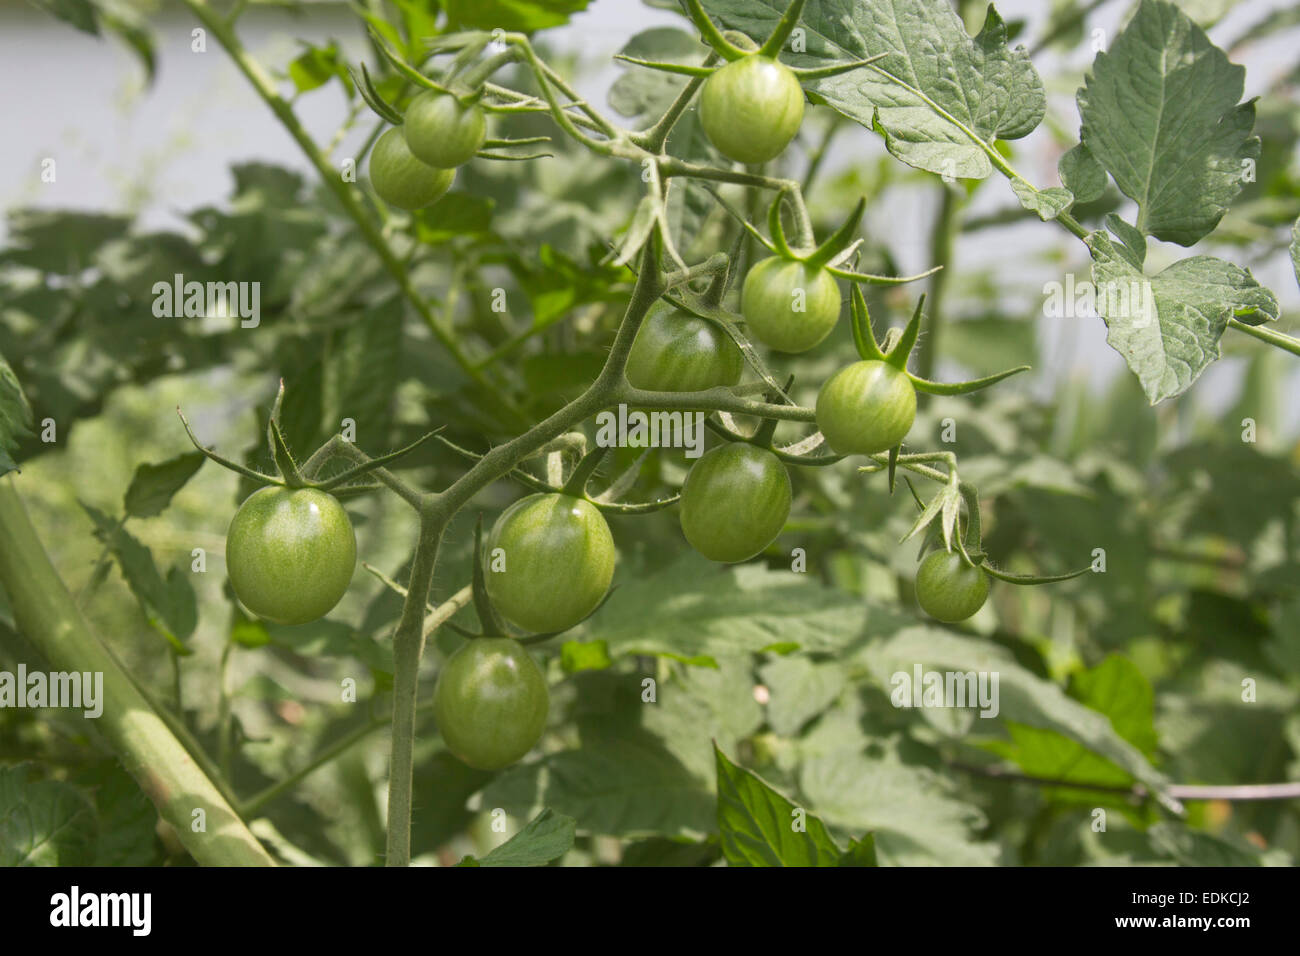 Close up of a sunny summer vegetable garden with plentiful ripening green tomatoes Stock Photo